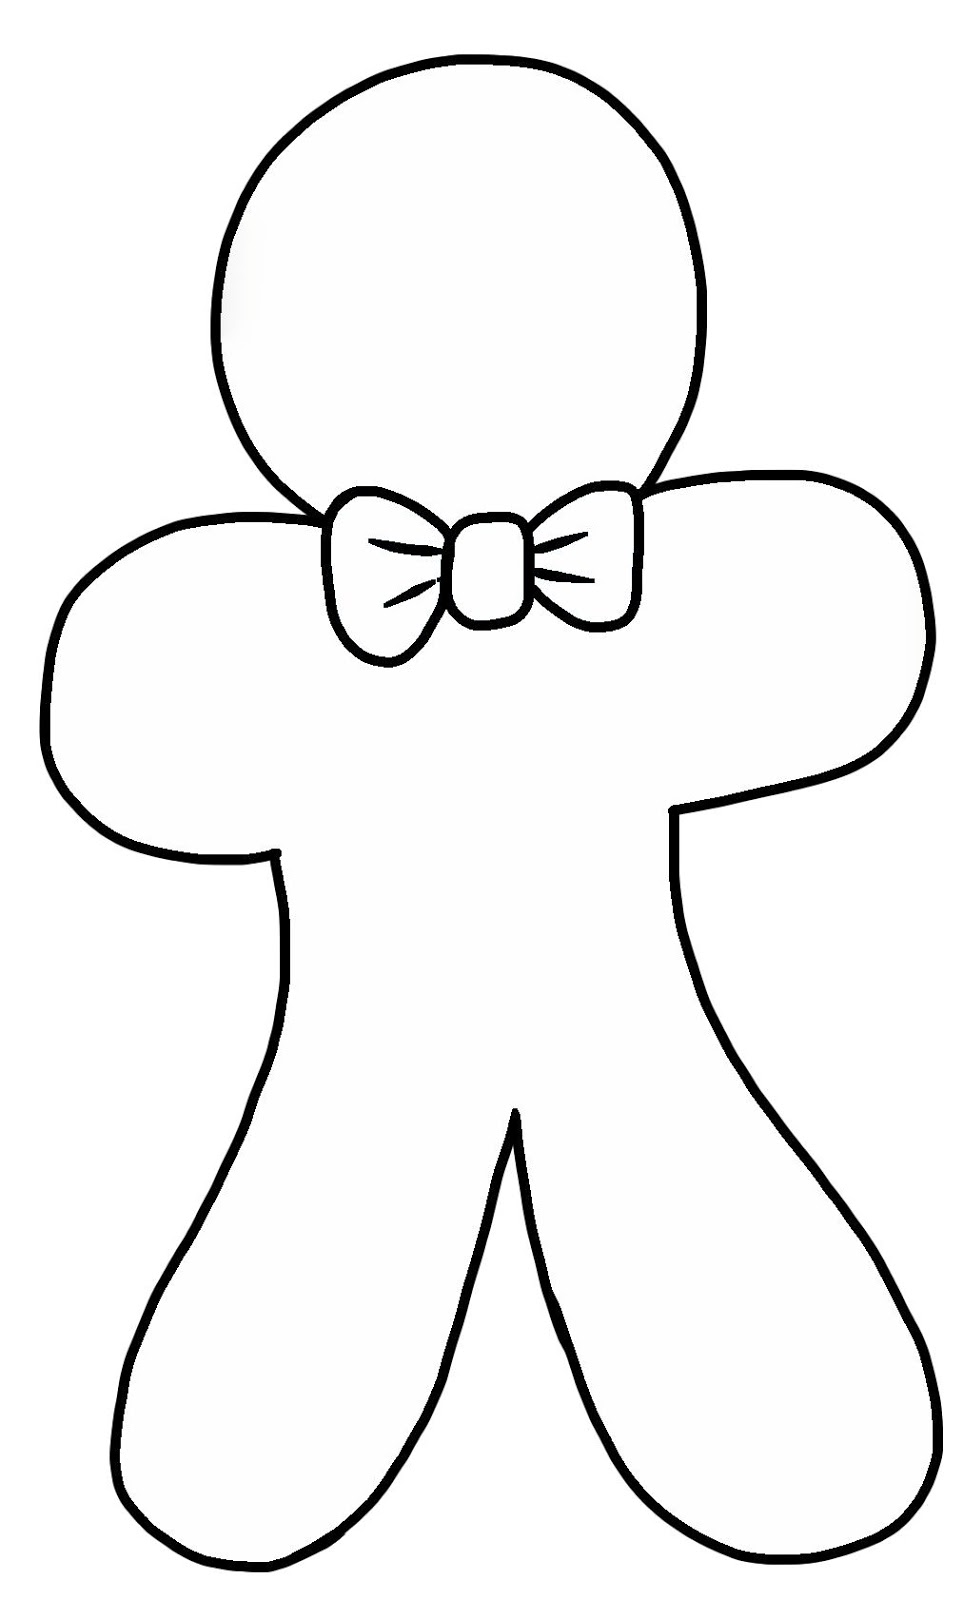 Gingerbread Woman Outline images